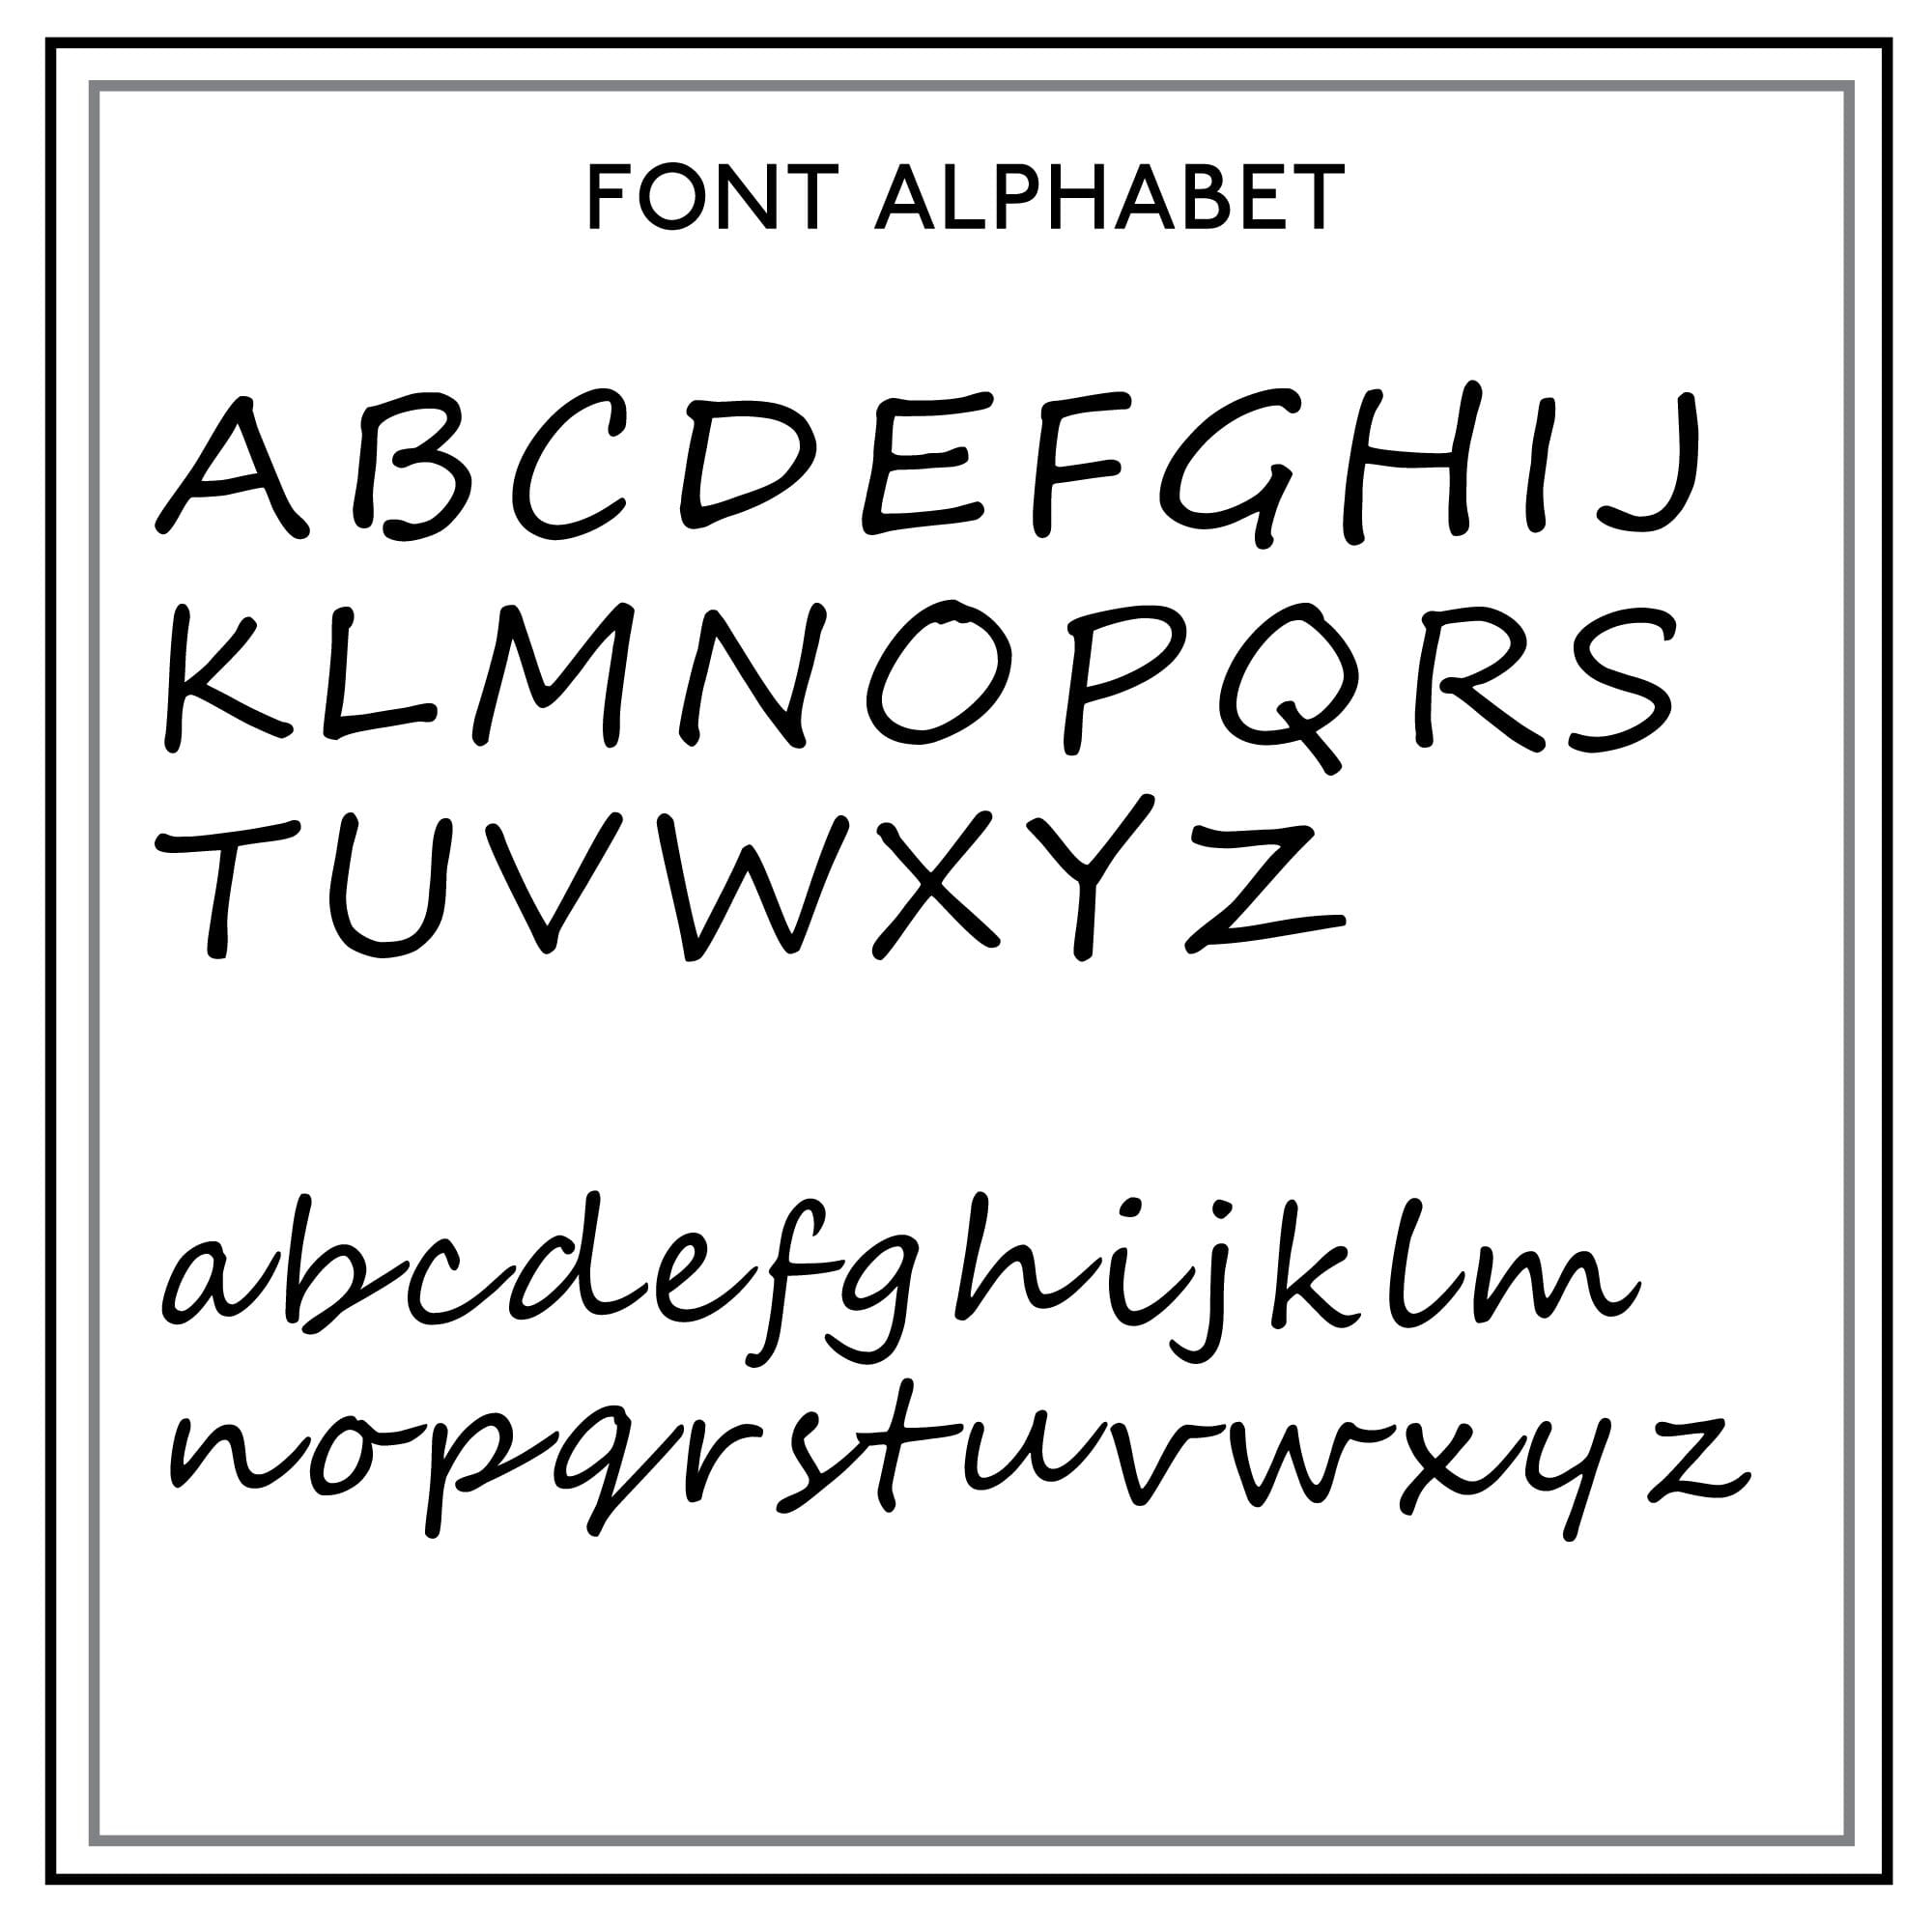 Image showing the font used on the cushion